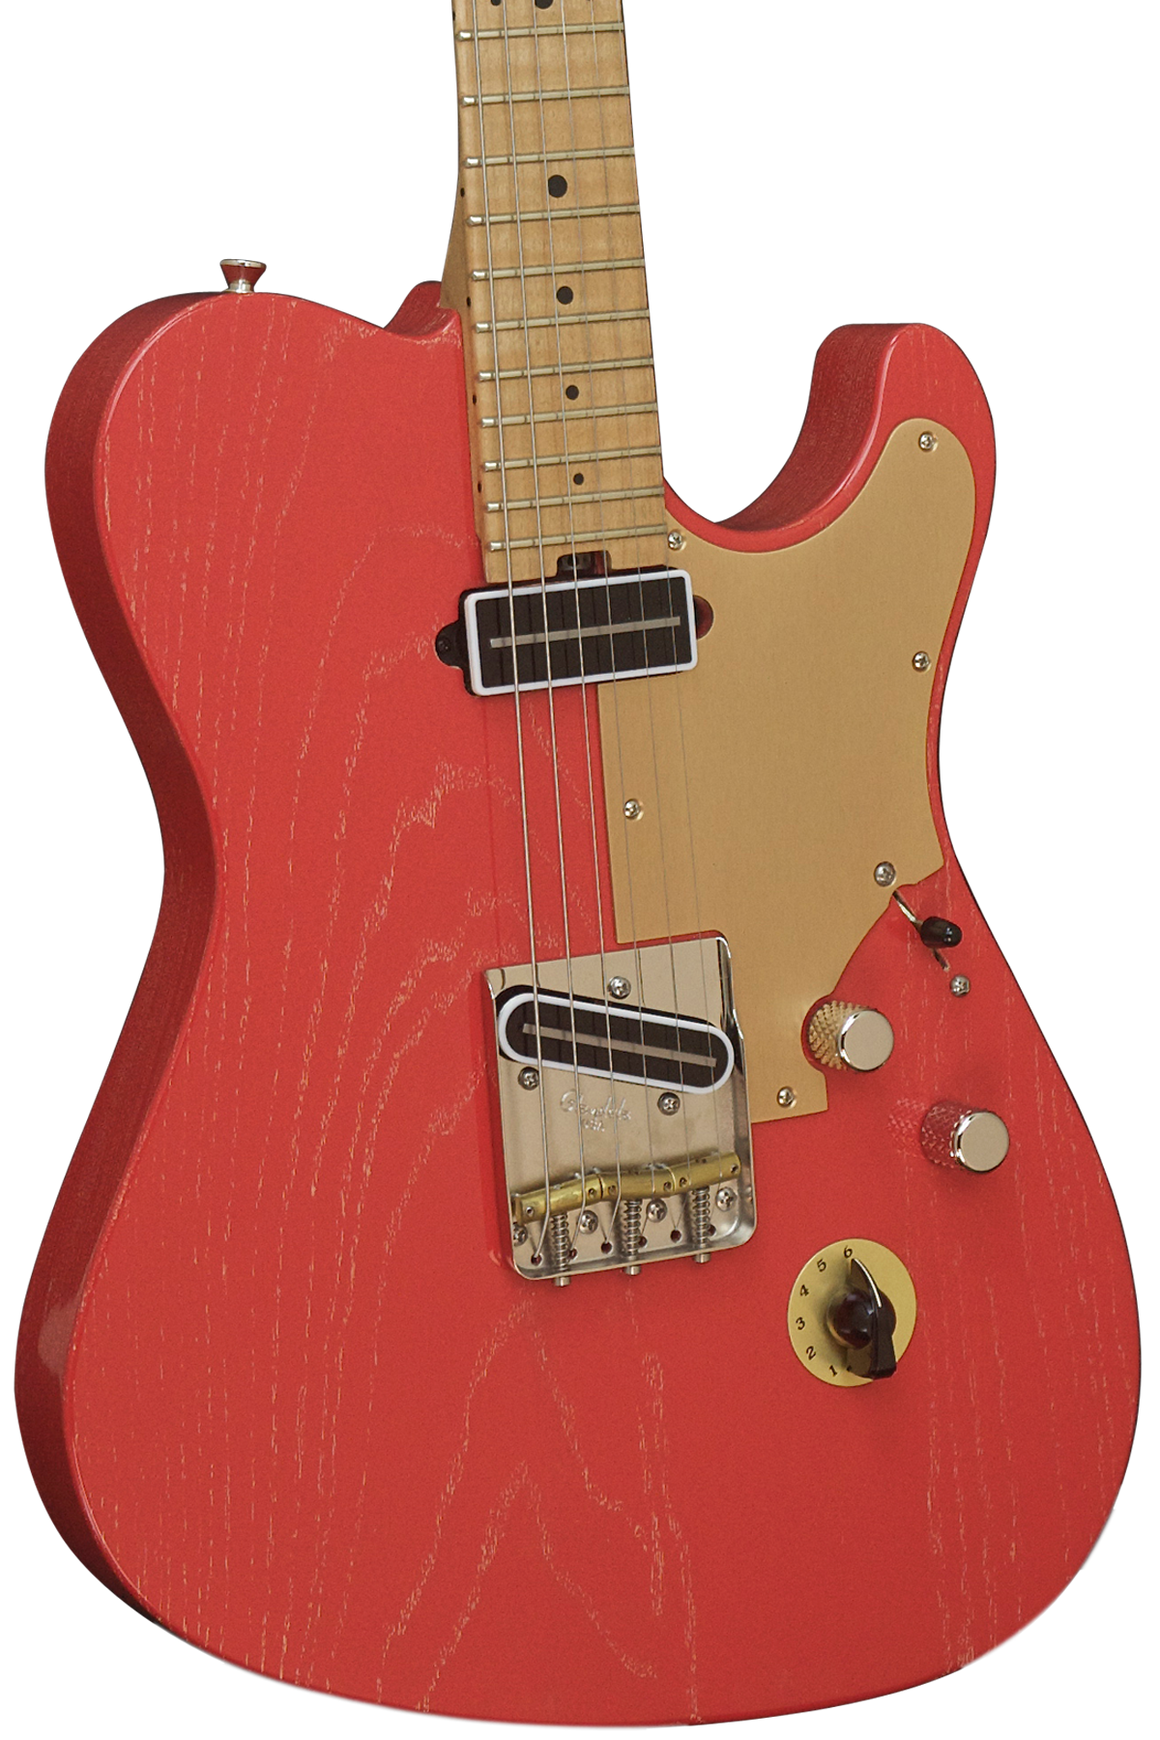 SOLD Asher T Deluxe Coral Nitro Guitar with Slim C Neck Shape